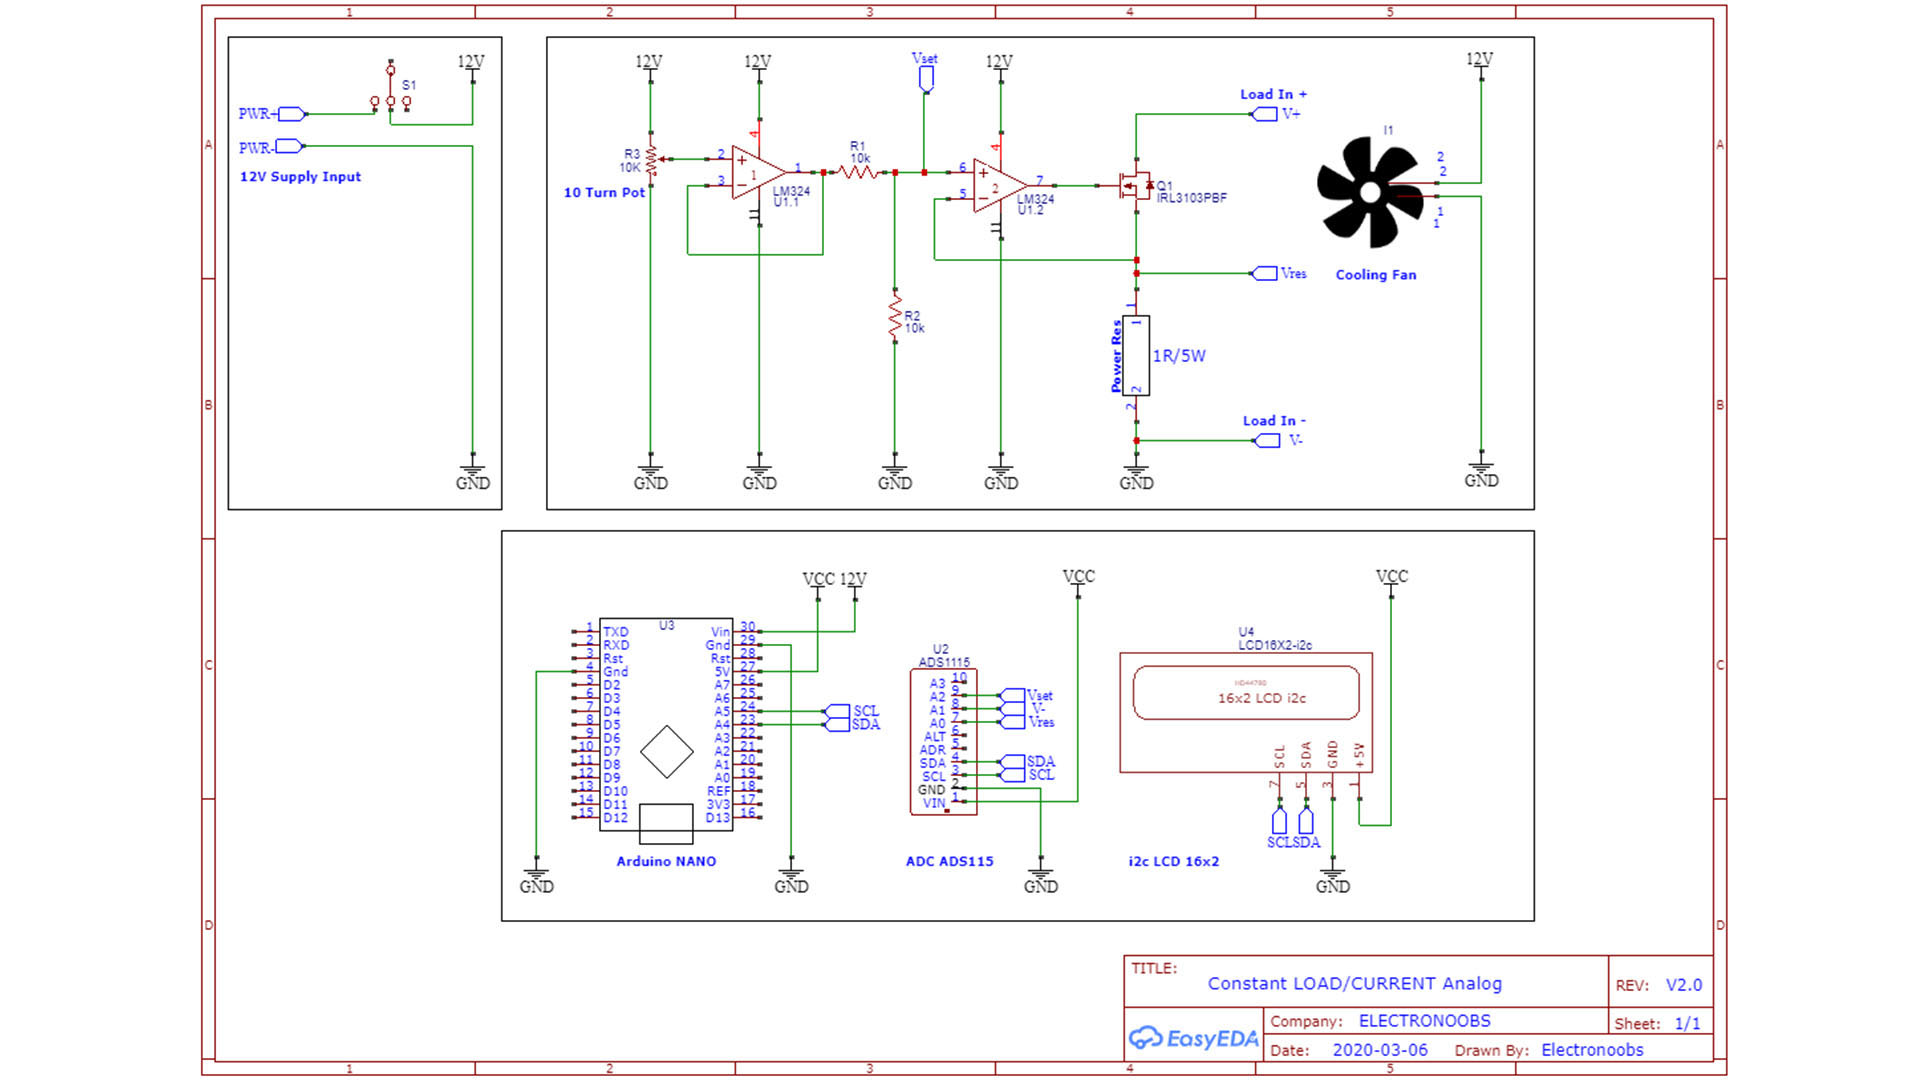 Constant load power controller schematic